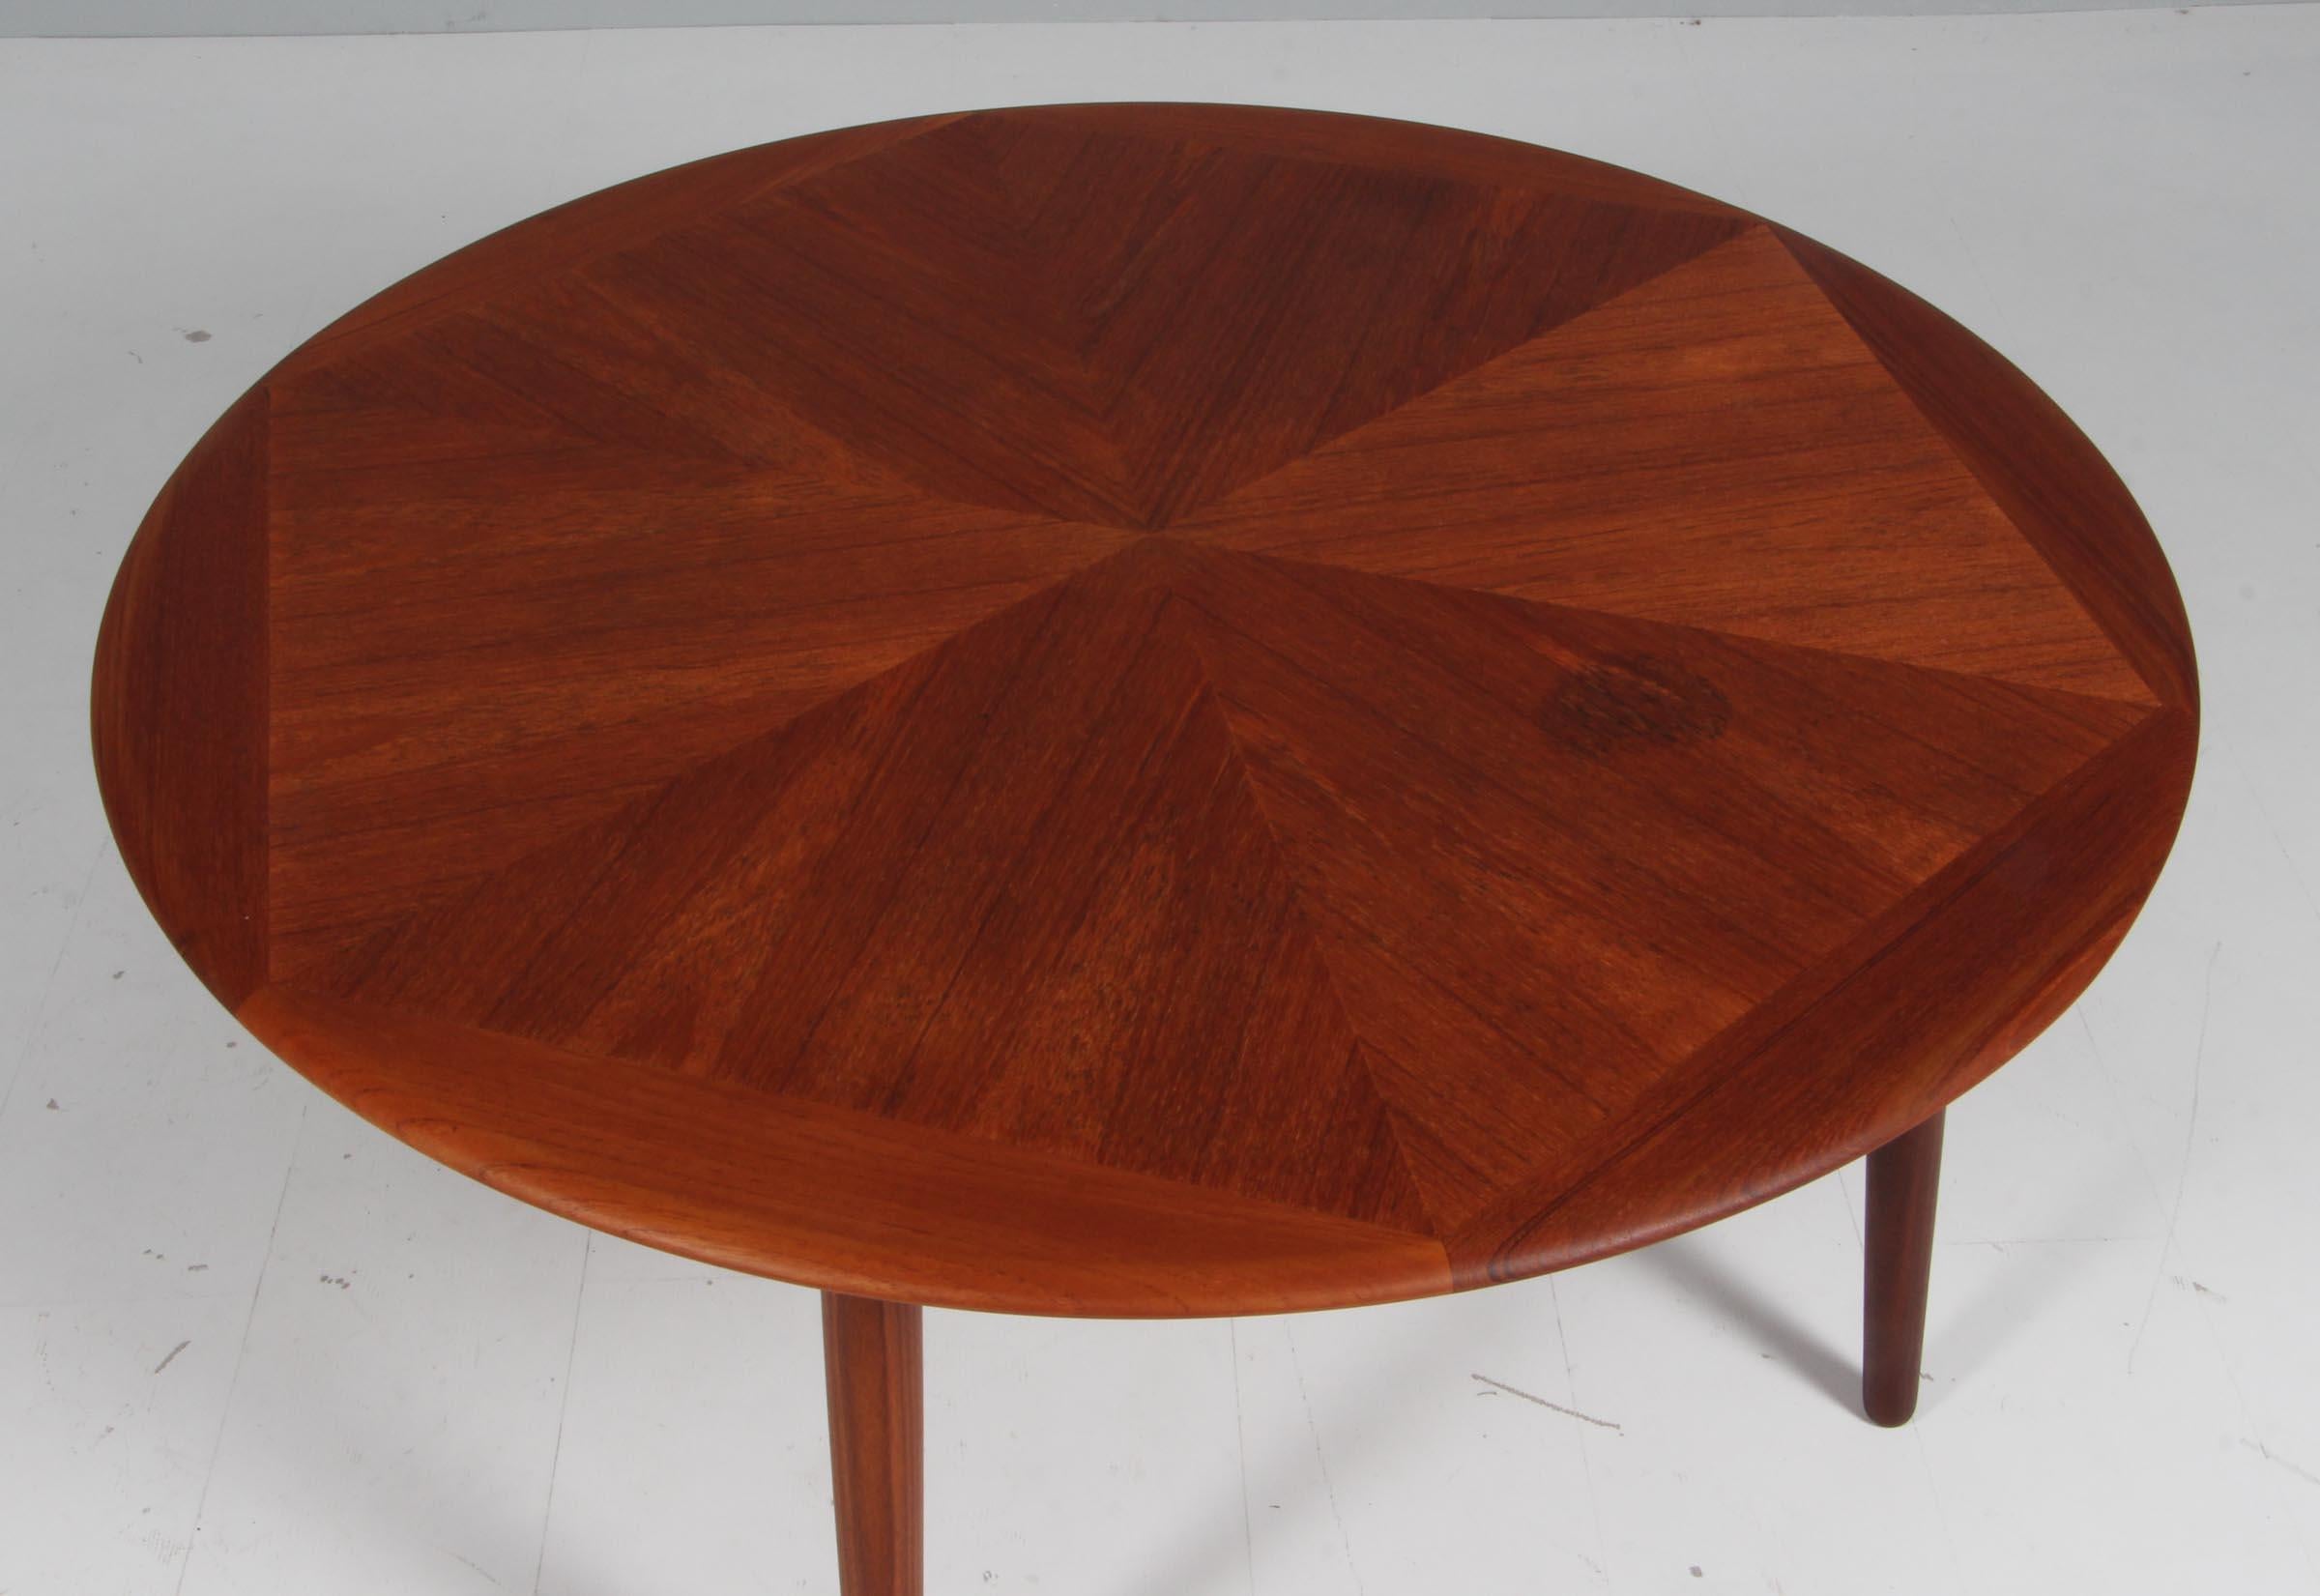 H. W. Klein round coffee table in partly solid teak

Made by Bramin 